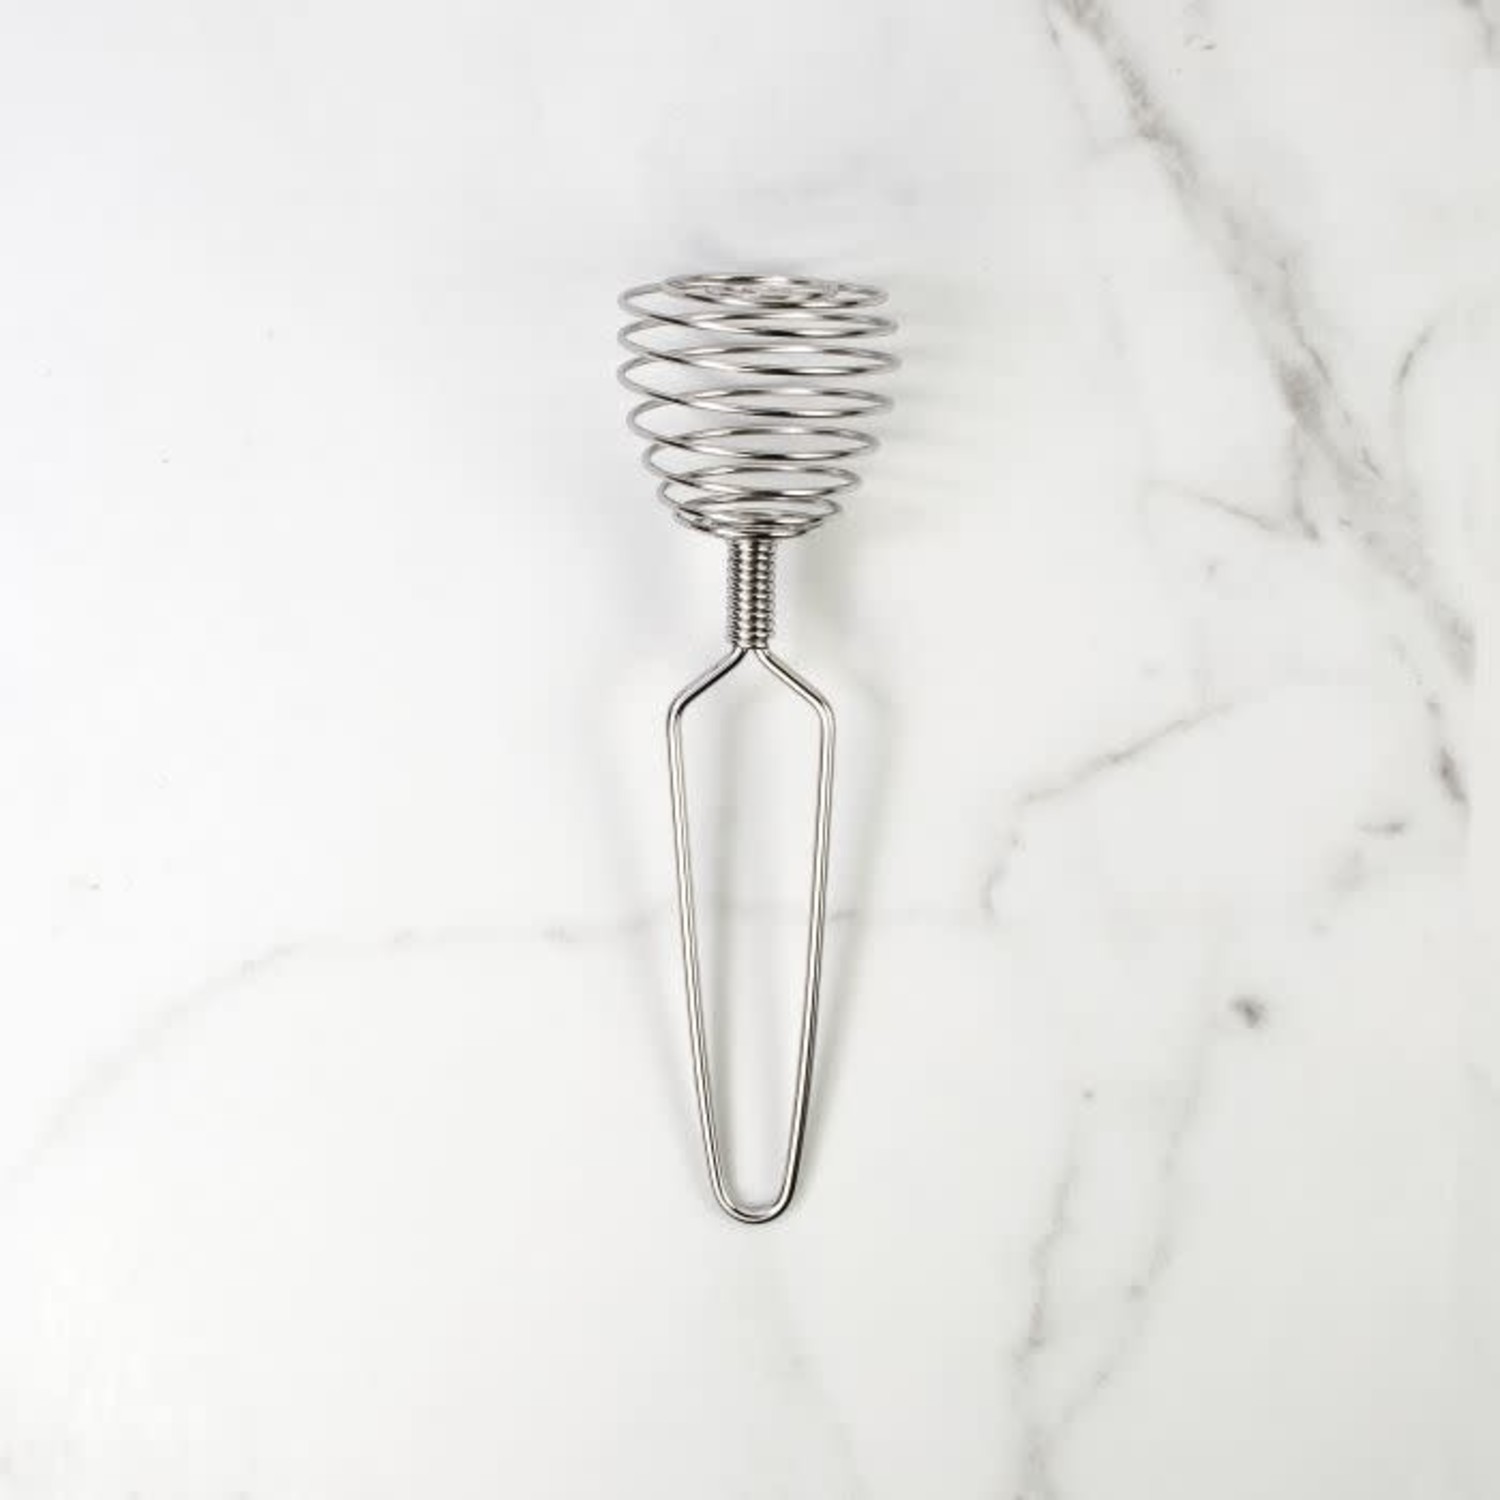 Fox Run French/Spring Coil Whisk, 7.25 x 1.75 x 1.75 inches, Metallic